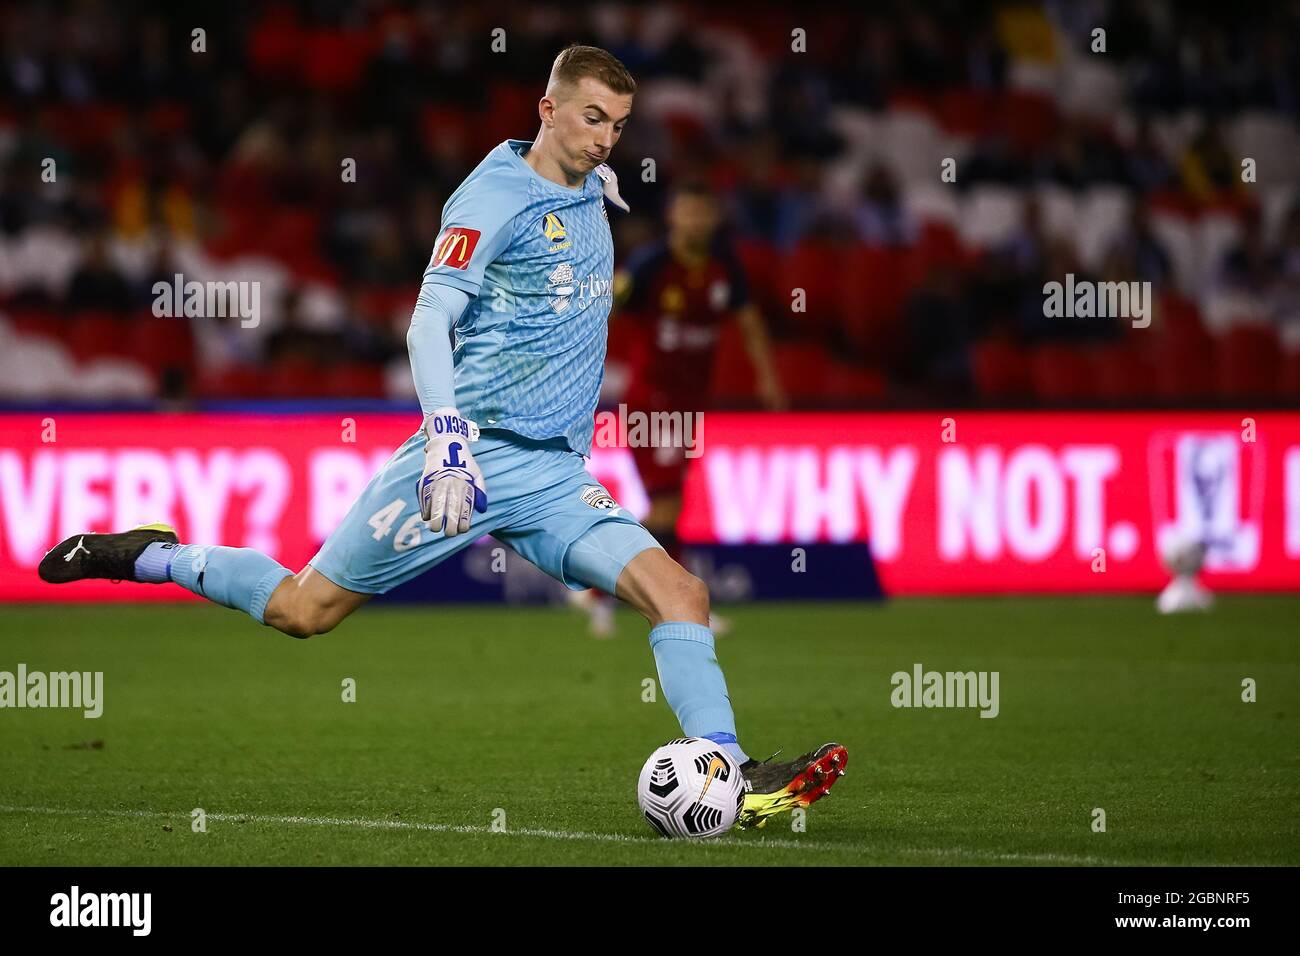 MELBOURNE, AUSTRALIA - MARCH 13: Joe Gauci of Adelaide United kicks the ball during the Hyundai A-League soccer match between Melbourne Victory and Adelaide United on March 13, 2021 at Marvel Stadium in Melbourne, Australia. Credit: Dave Hewison/Speed Media/Alamy Live News Stock Photo